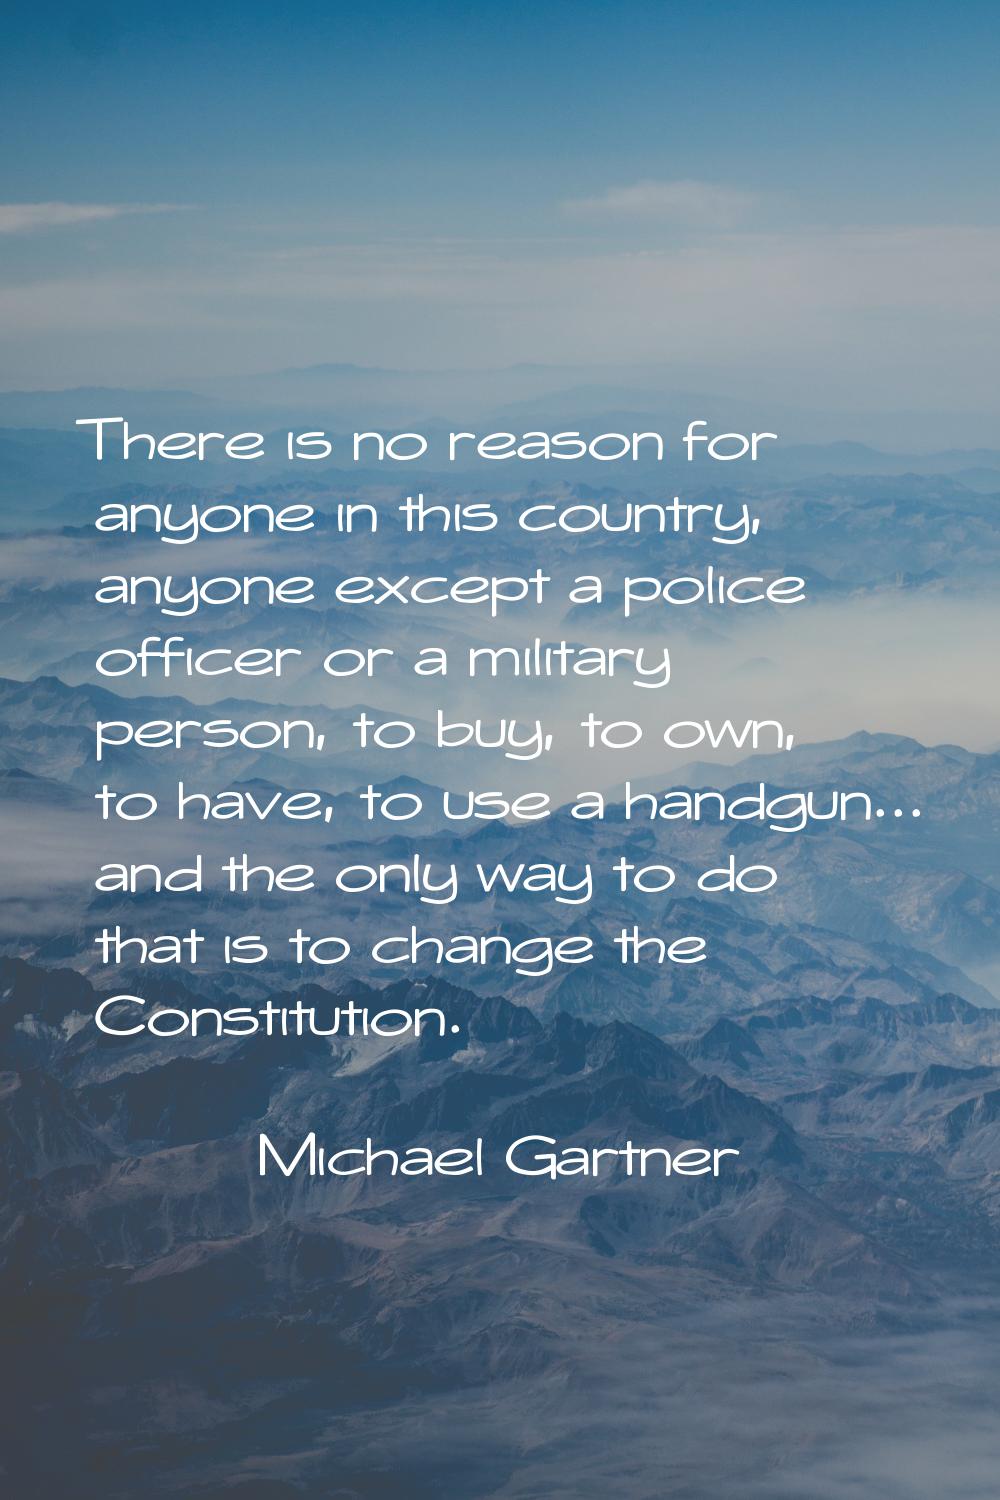 There is no reason for anyone in this country, anyone except a police officer or a military person,